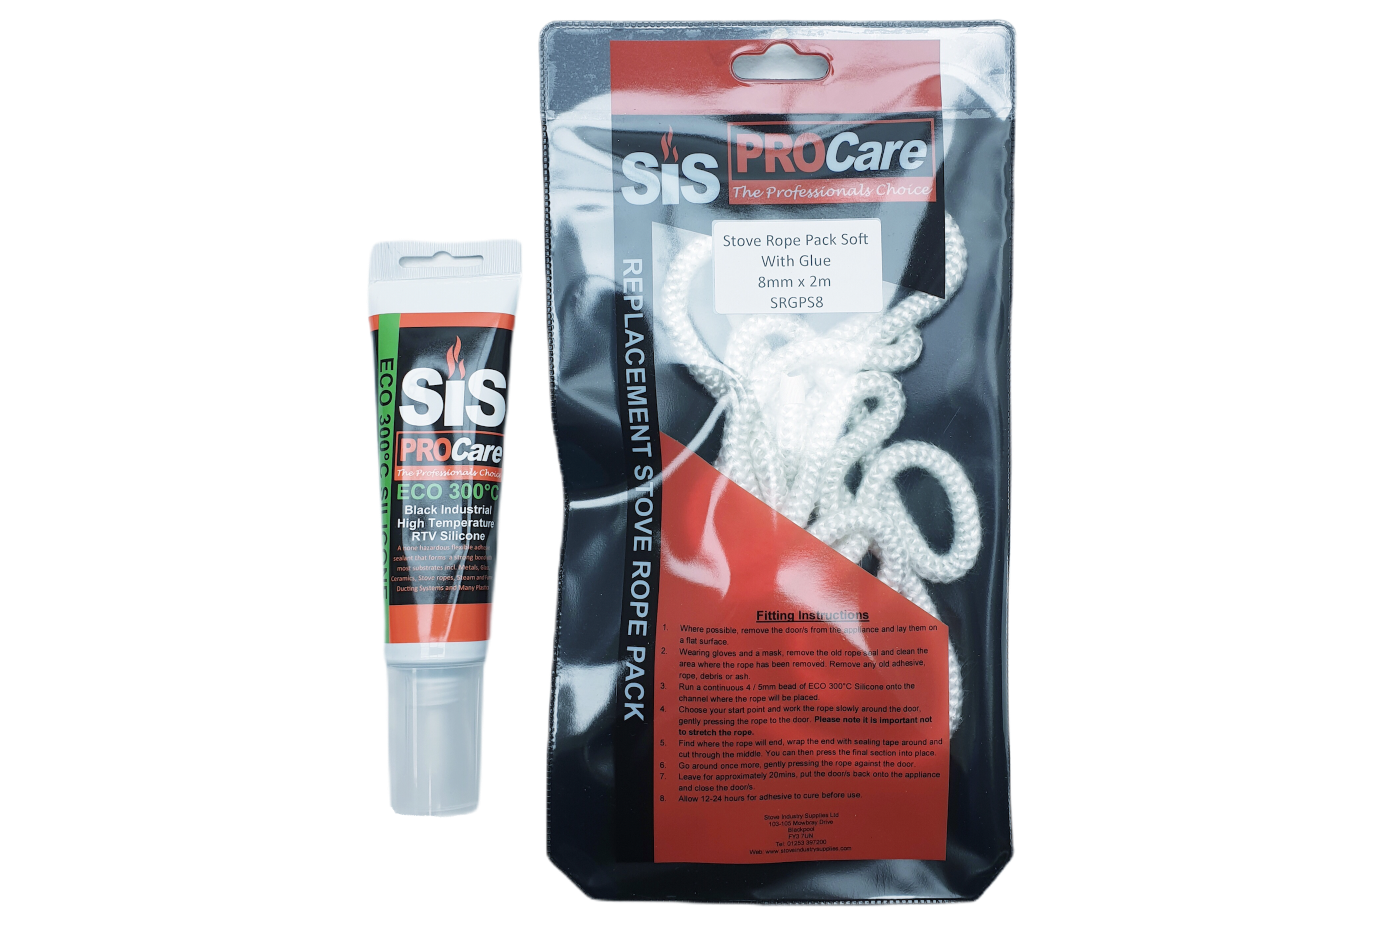 SiS Procare White 8 milimetre x 2 metre Soft Stove Rope & 80 millilitre Rope Glue Pack - product code SRGPS8